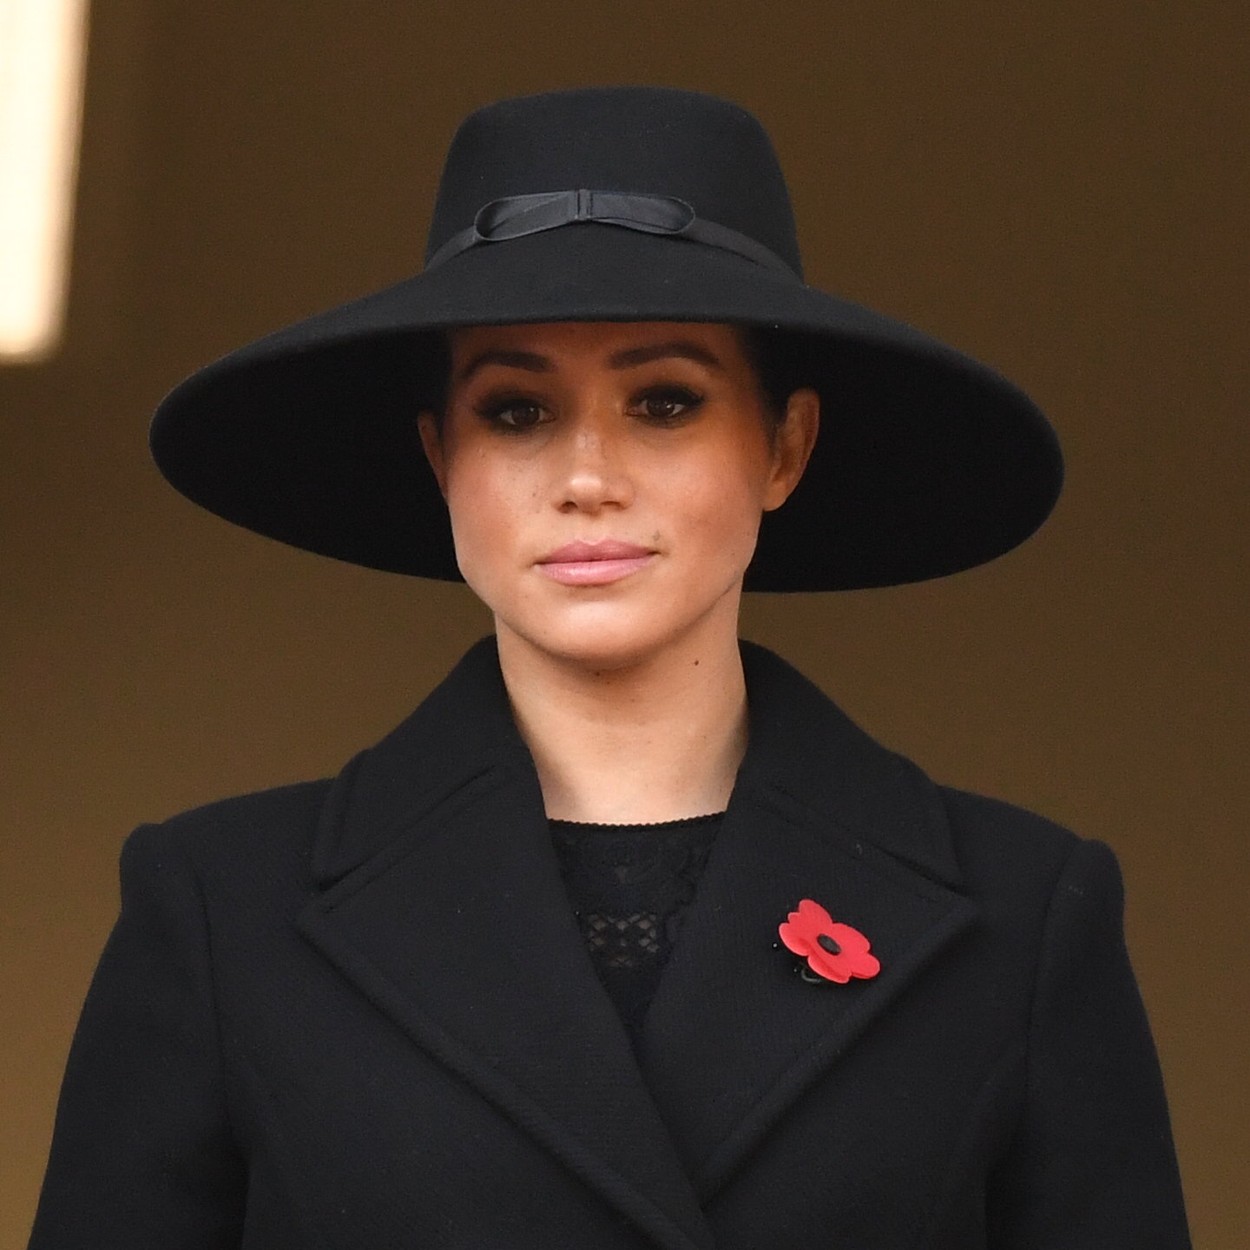 Members of The Royal Family attend the Remembrance Sunday Service at The Cenotaph, Whitehall, London, UK, on the 10th November 2019.
10 Nov 2019,Image: 482075850, License: Rights-managed, Restrictions: NO United Kingdom, Model Release: no, Credit line: James Whatling / The Mega Agency / Profimedia